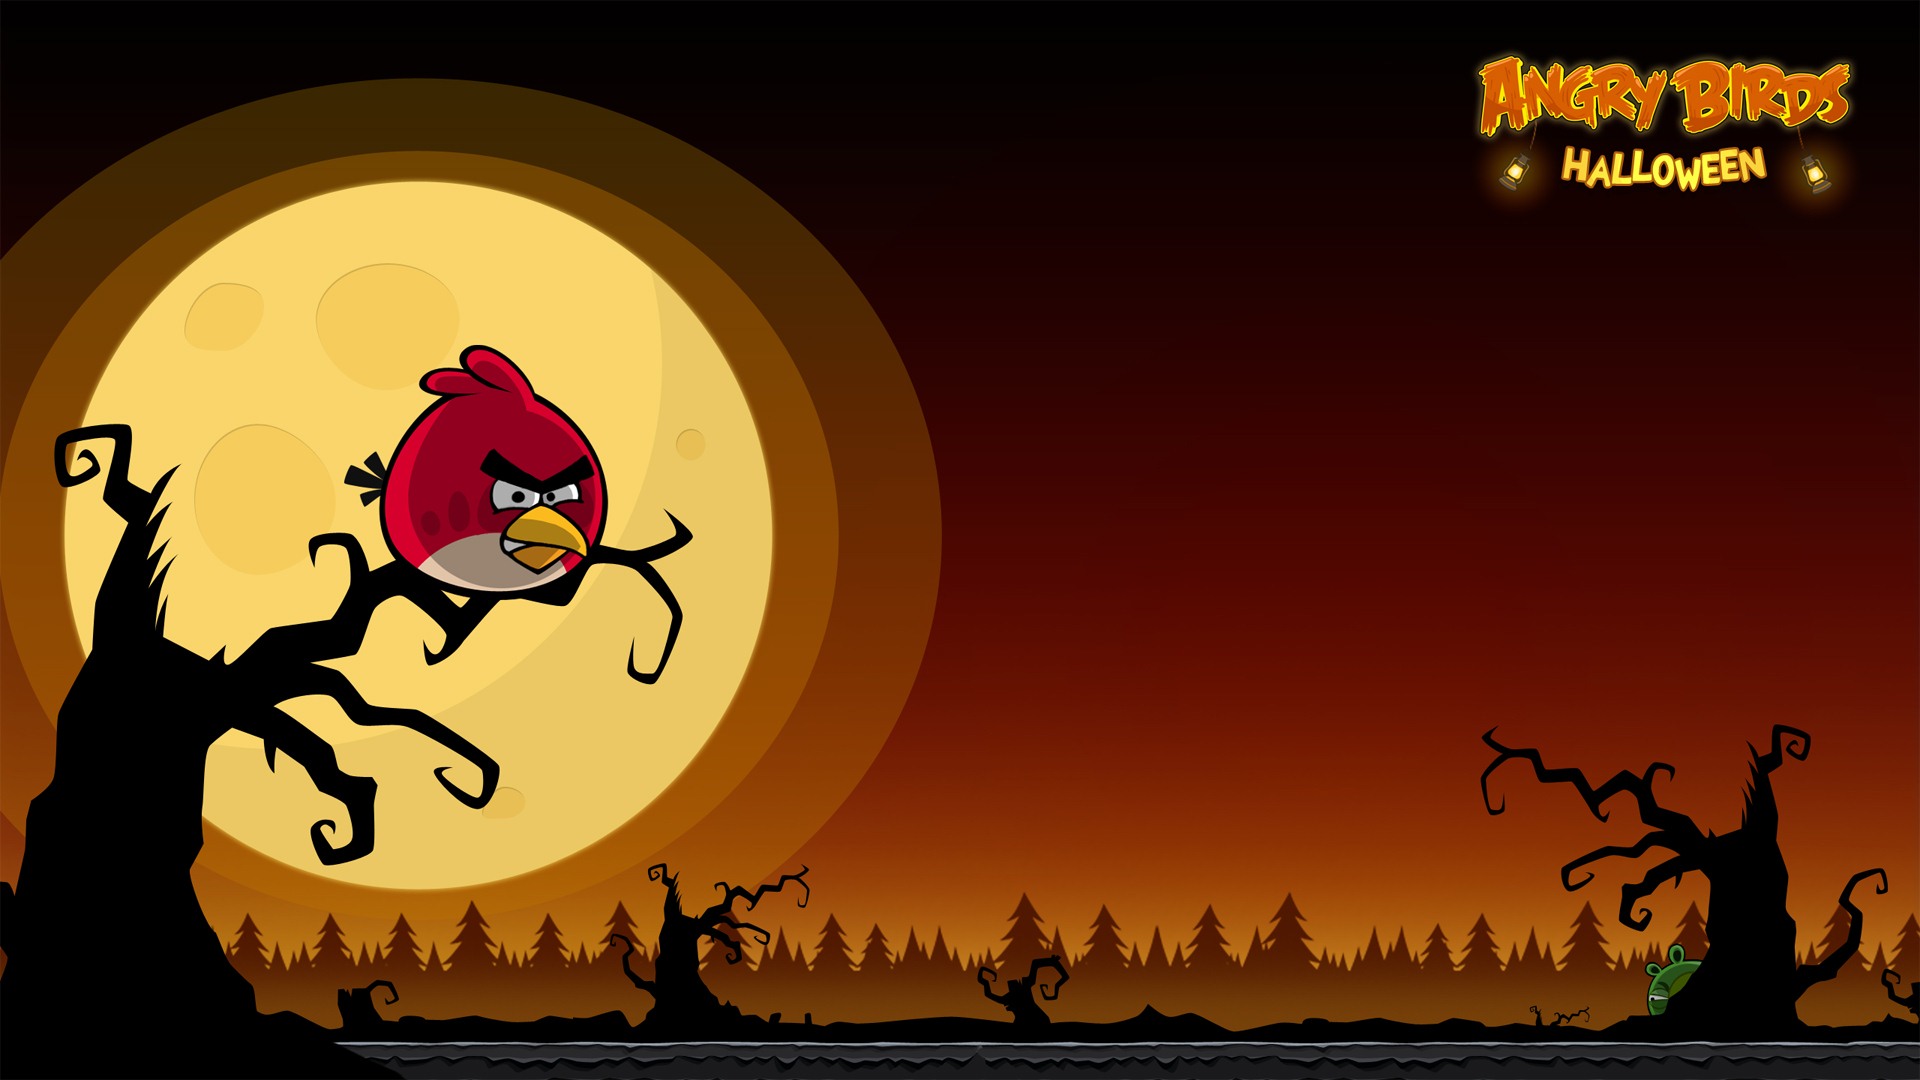 Angry Birds Spiel wallpapers #26 - 1920x1080